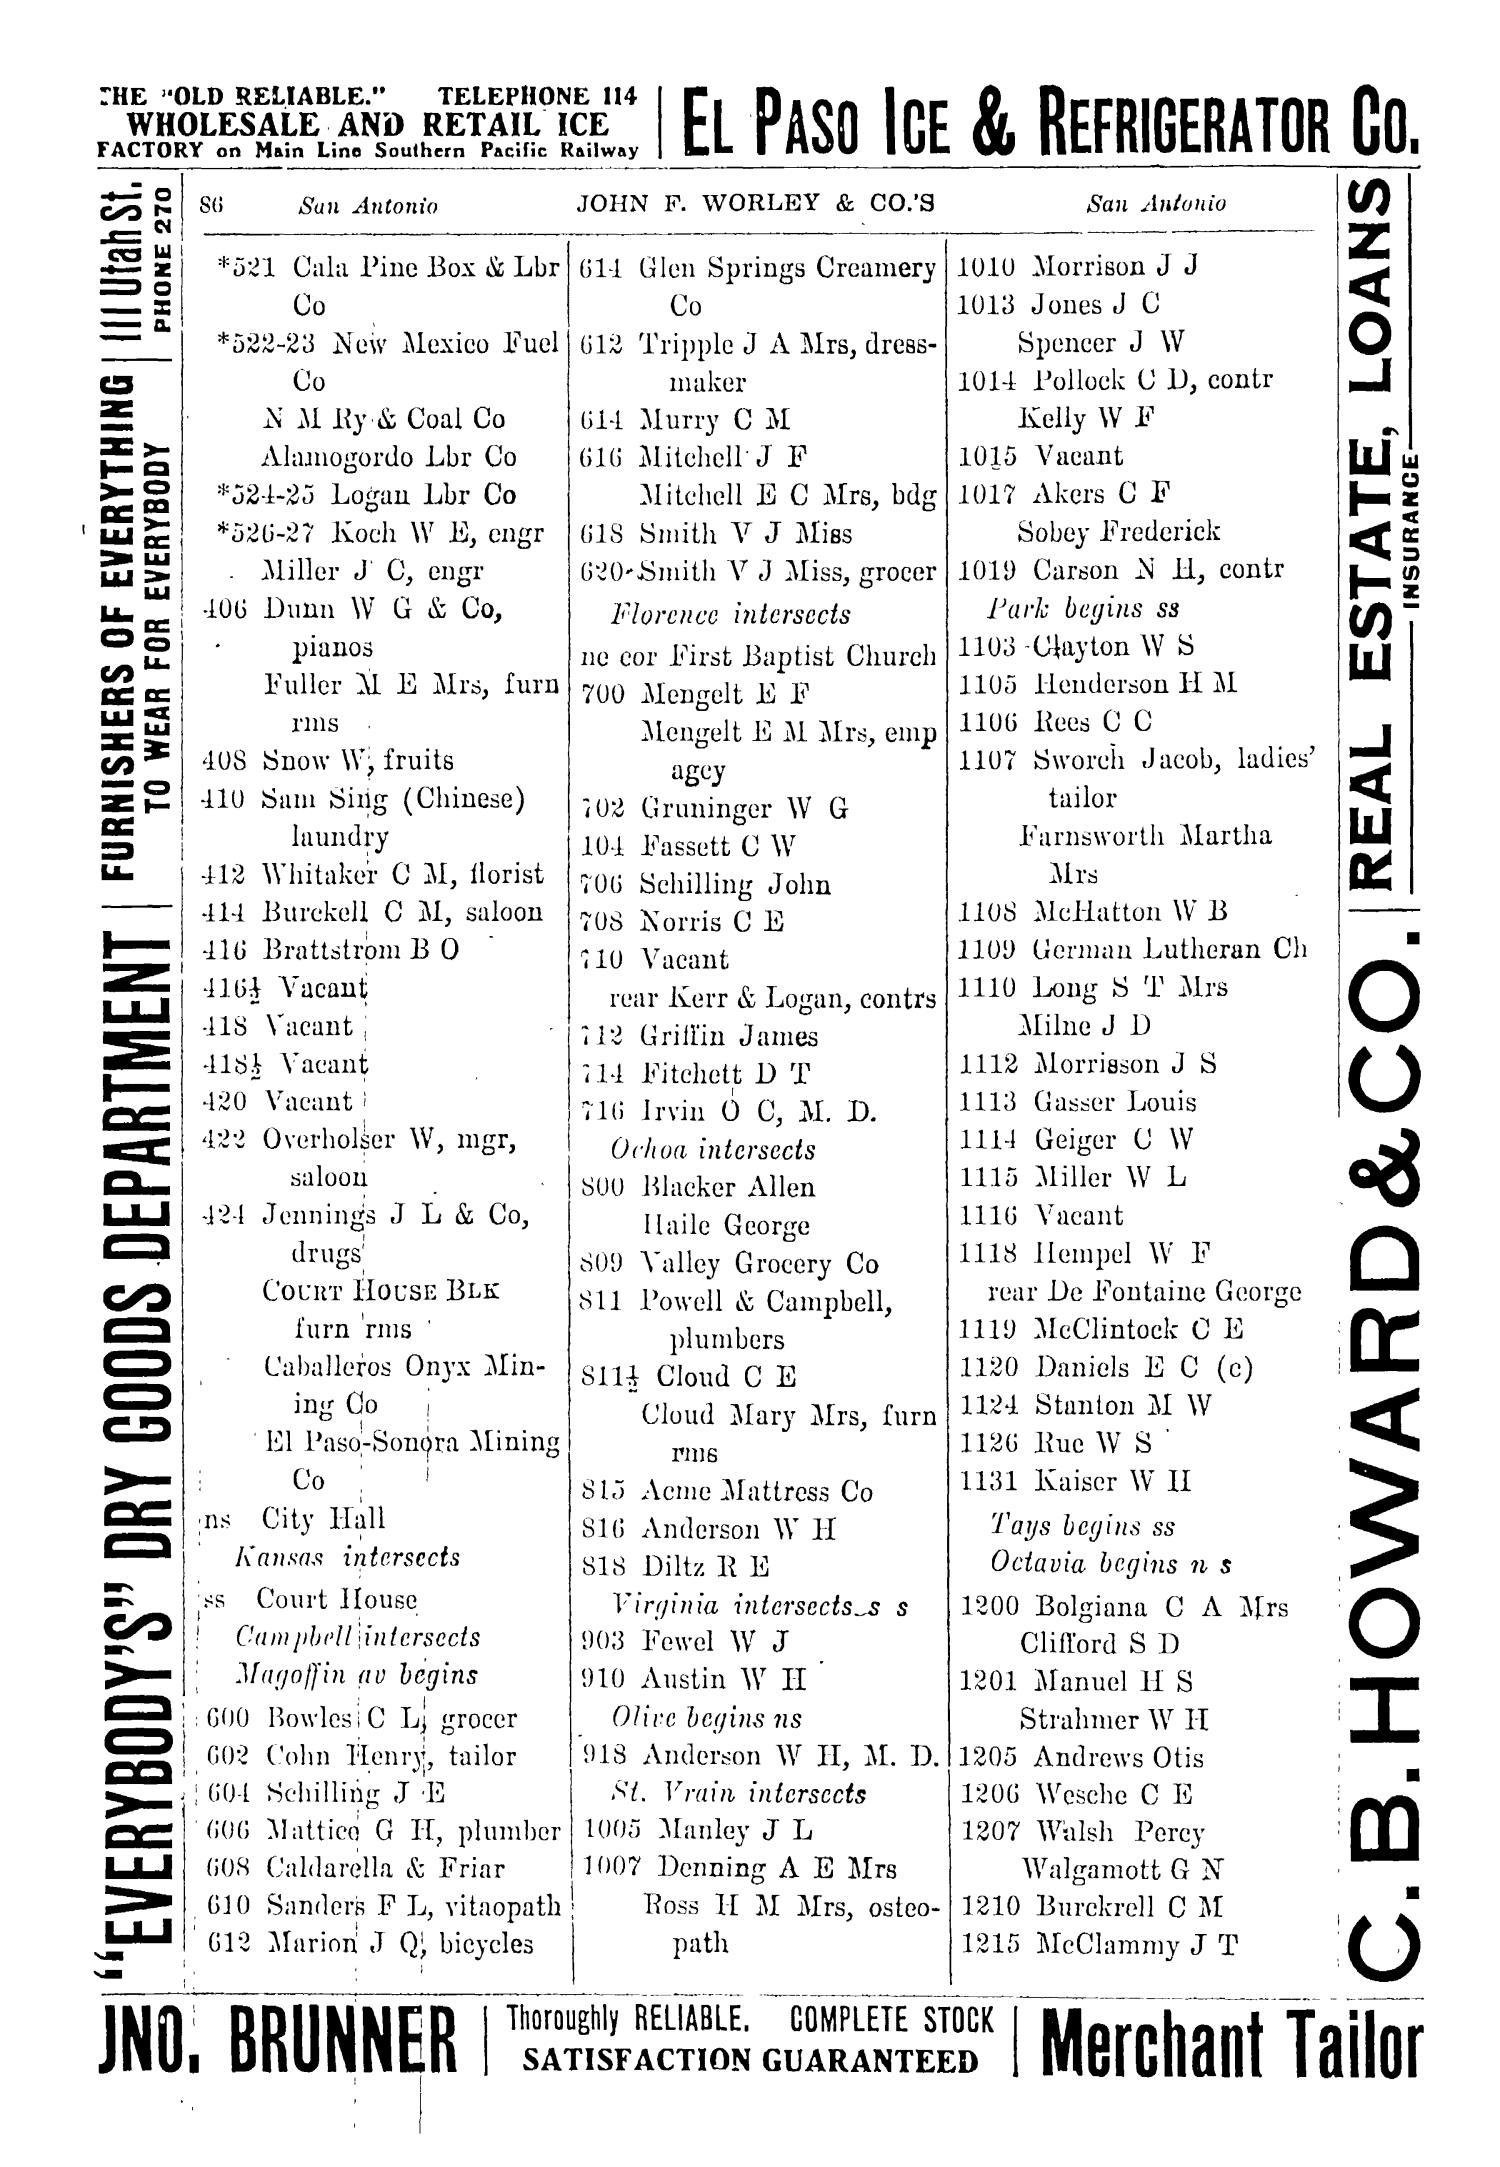 John F. Worley & Co.'s El Paso Directory for 1906
                                                
                                                    86
                                                